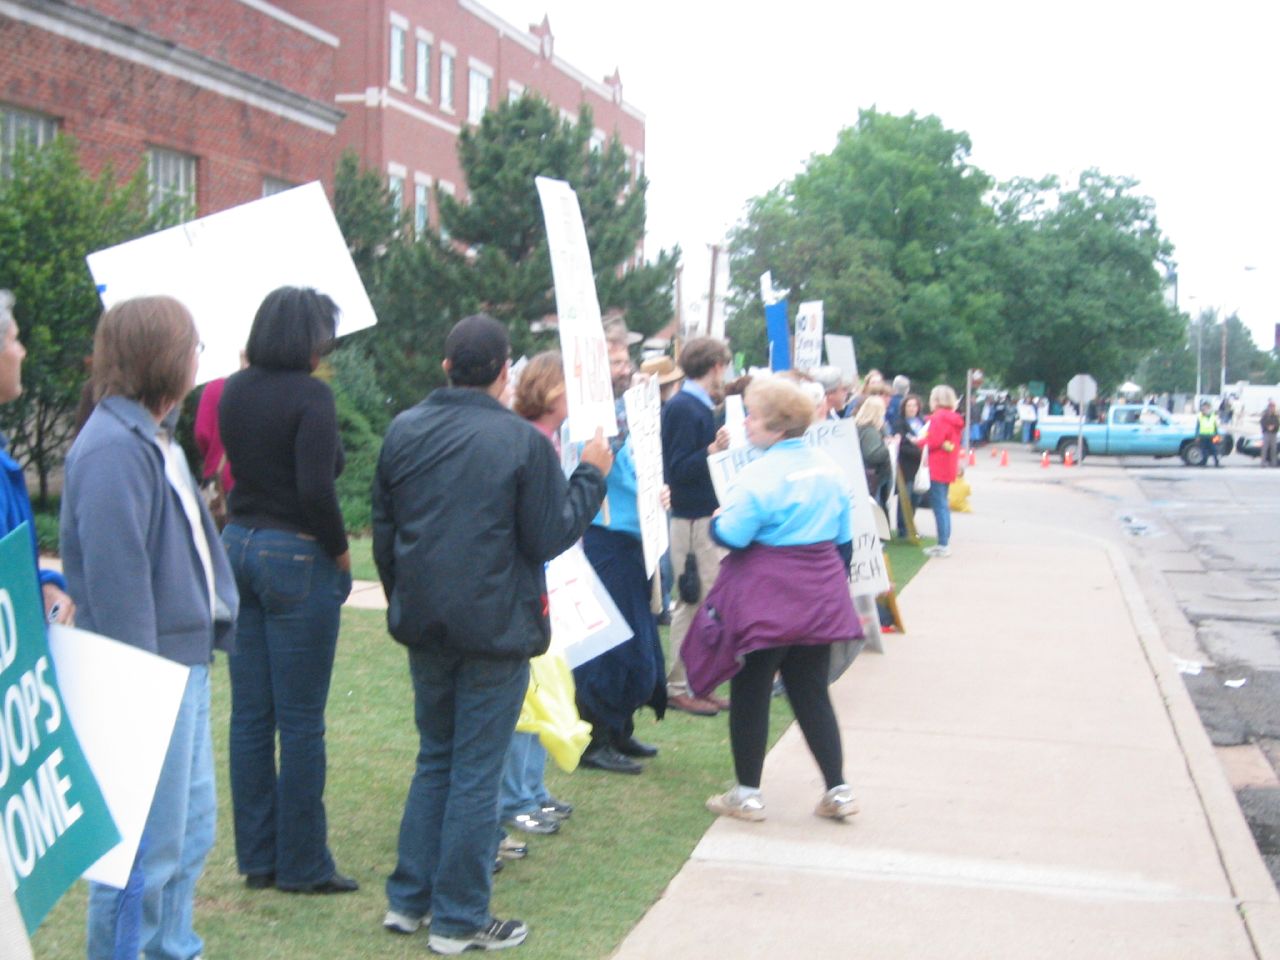 people hold signs and stand on a curb